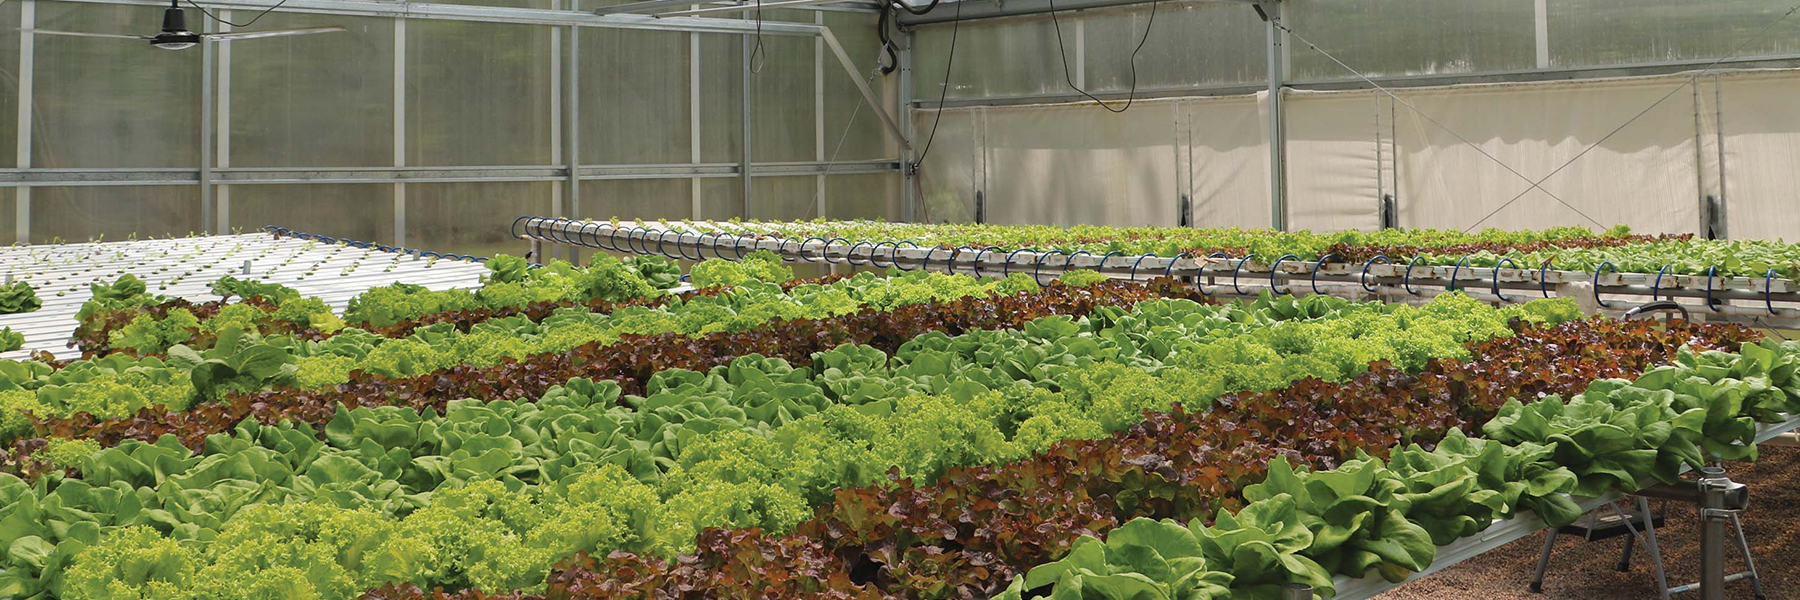 commercial hydroponics system